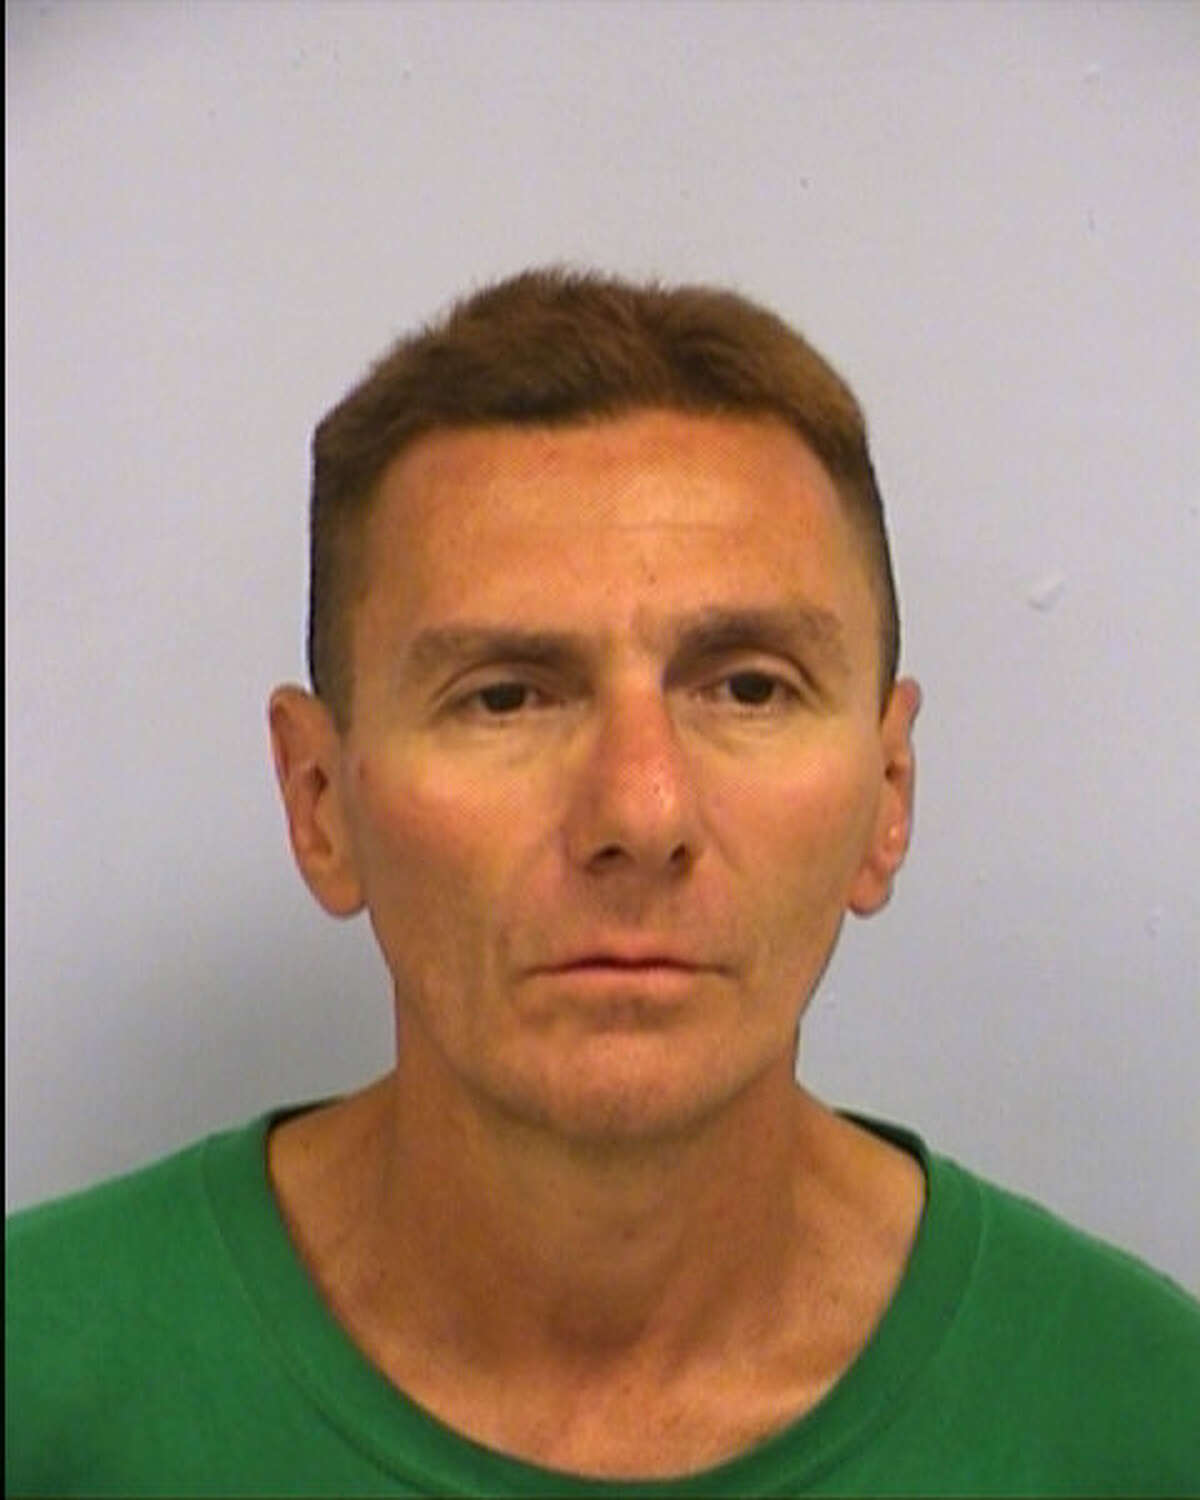 Edward Bennett, 49, was arrested for attempted capital murder for allegedly slashing a woman's throat during a robbery outside an H-E-B in Austin.